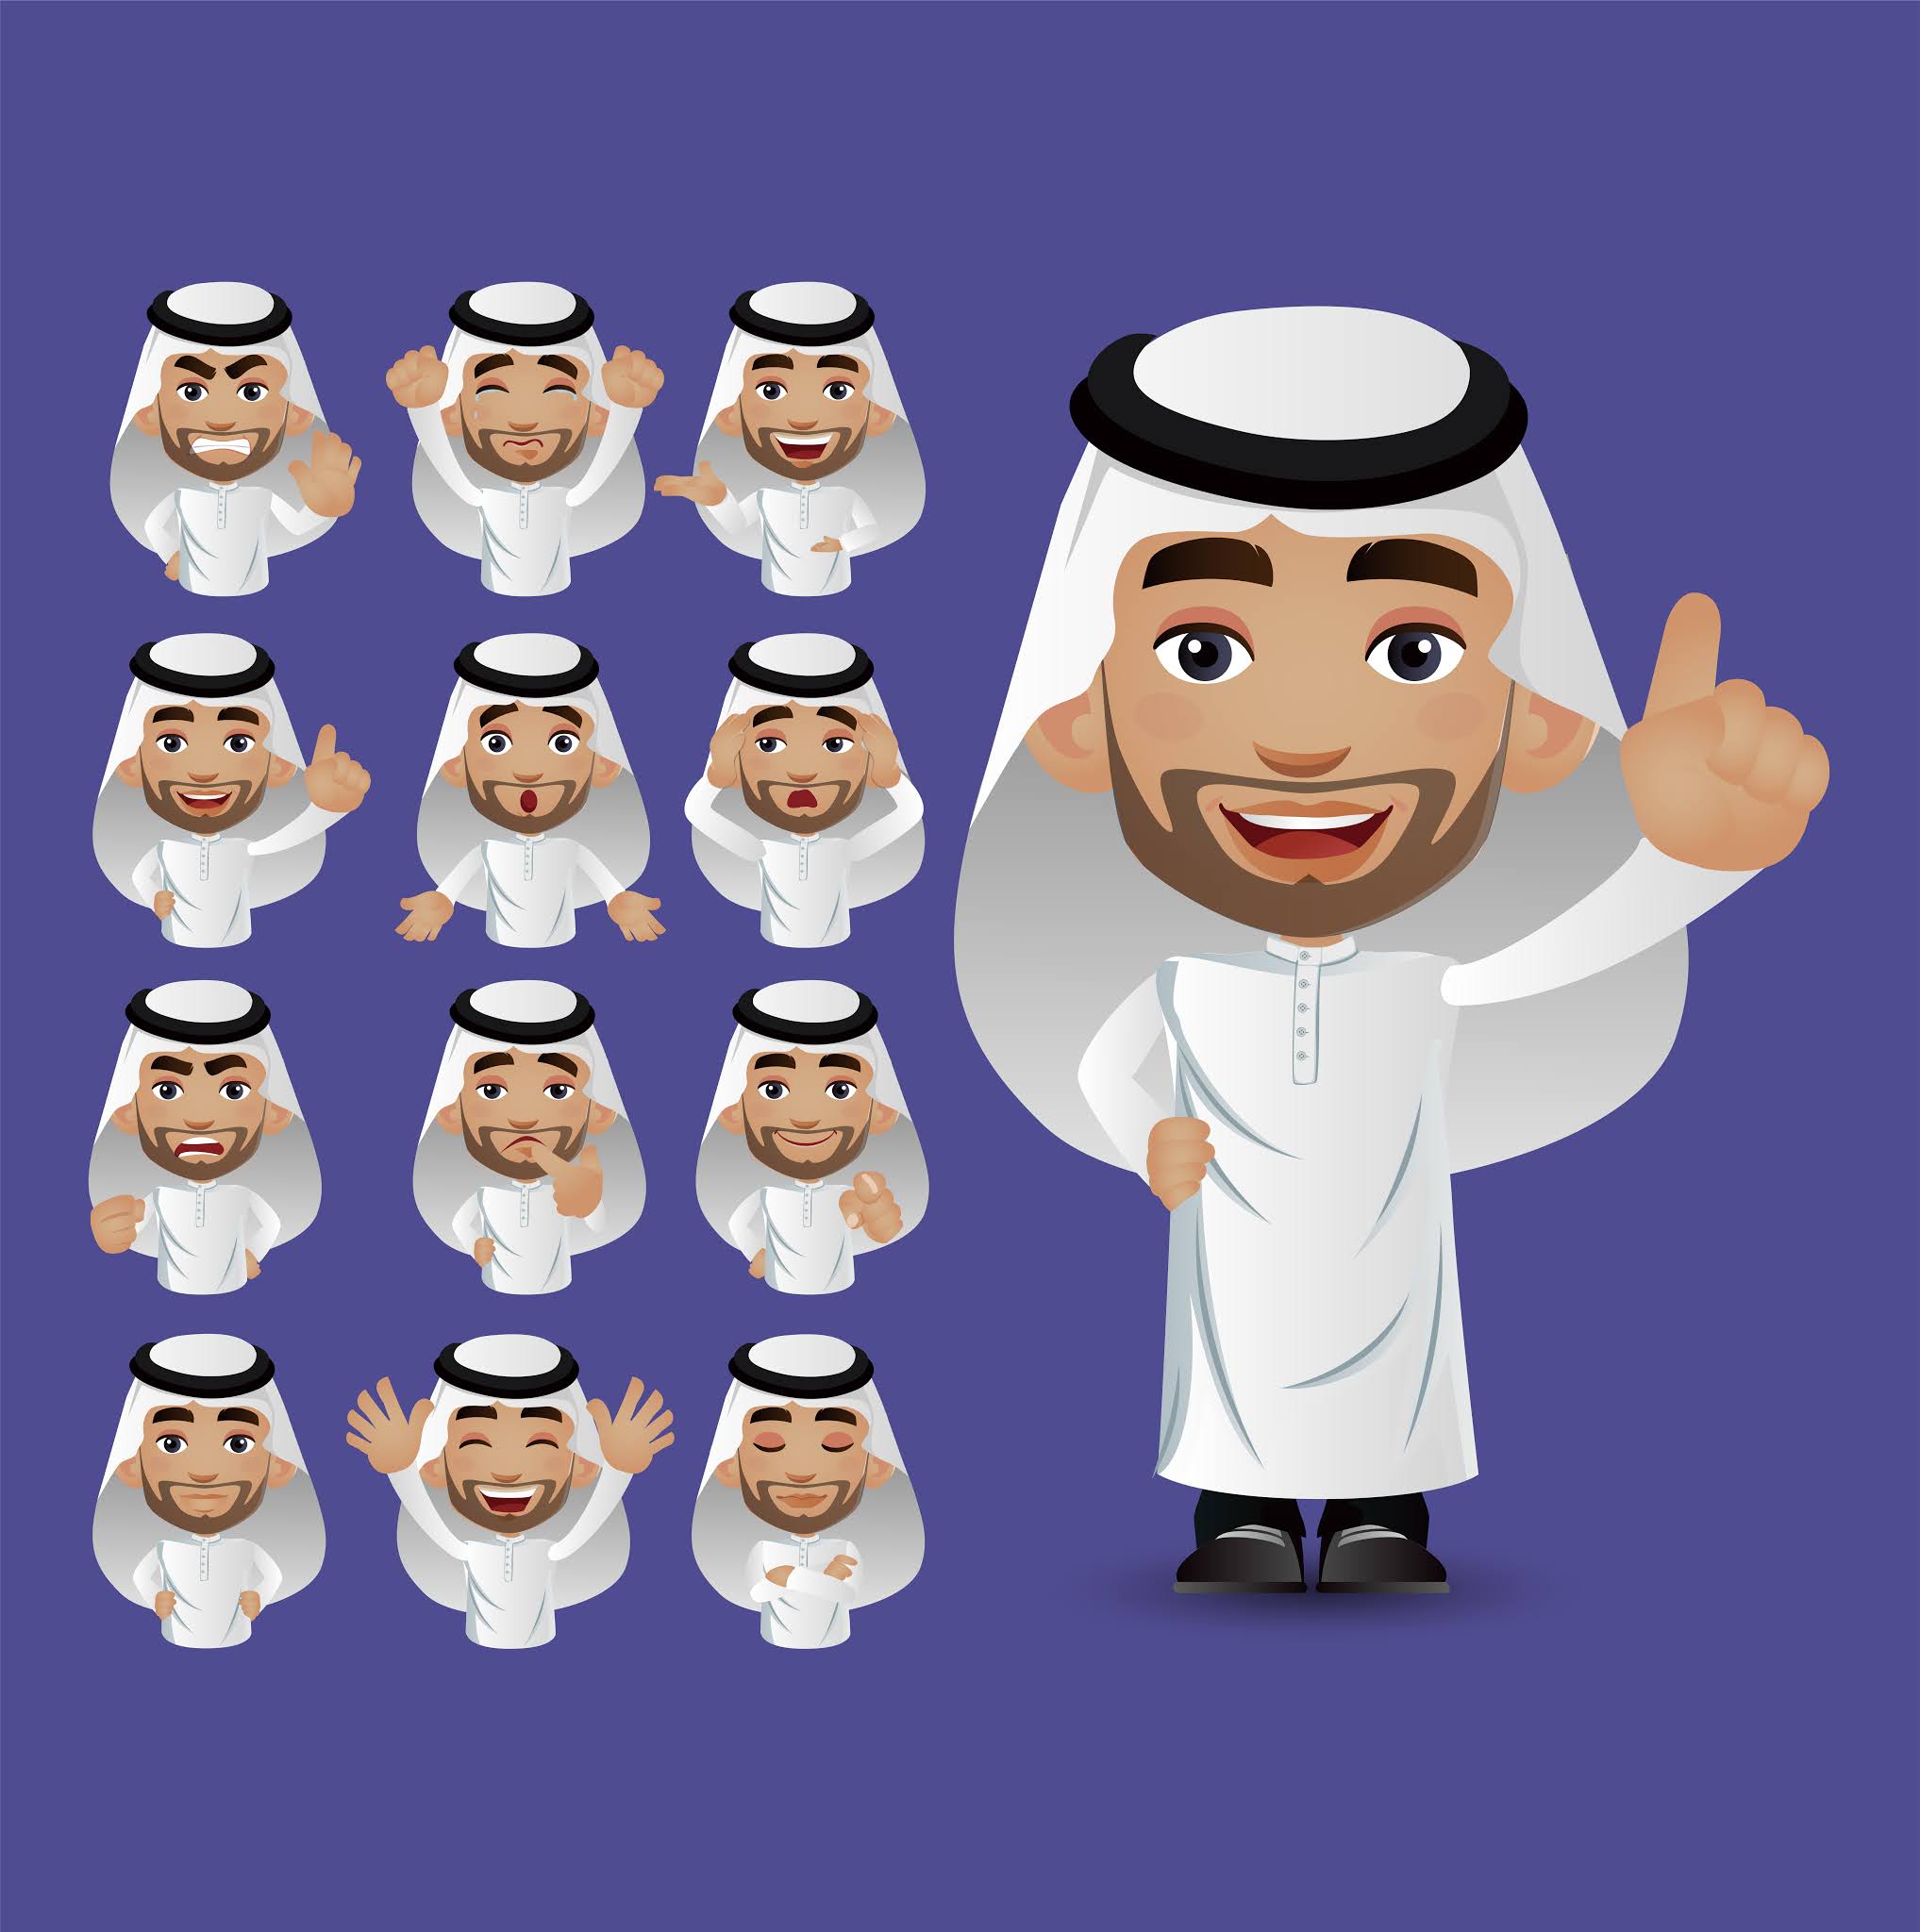 Gulf Youth Cartoon Characters Designs Victor Photoshop